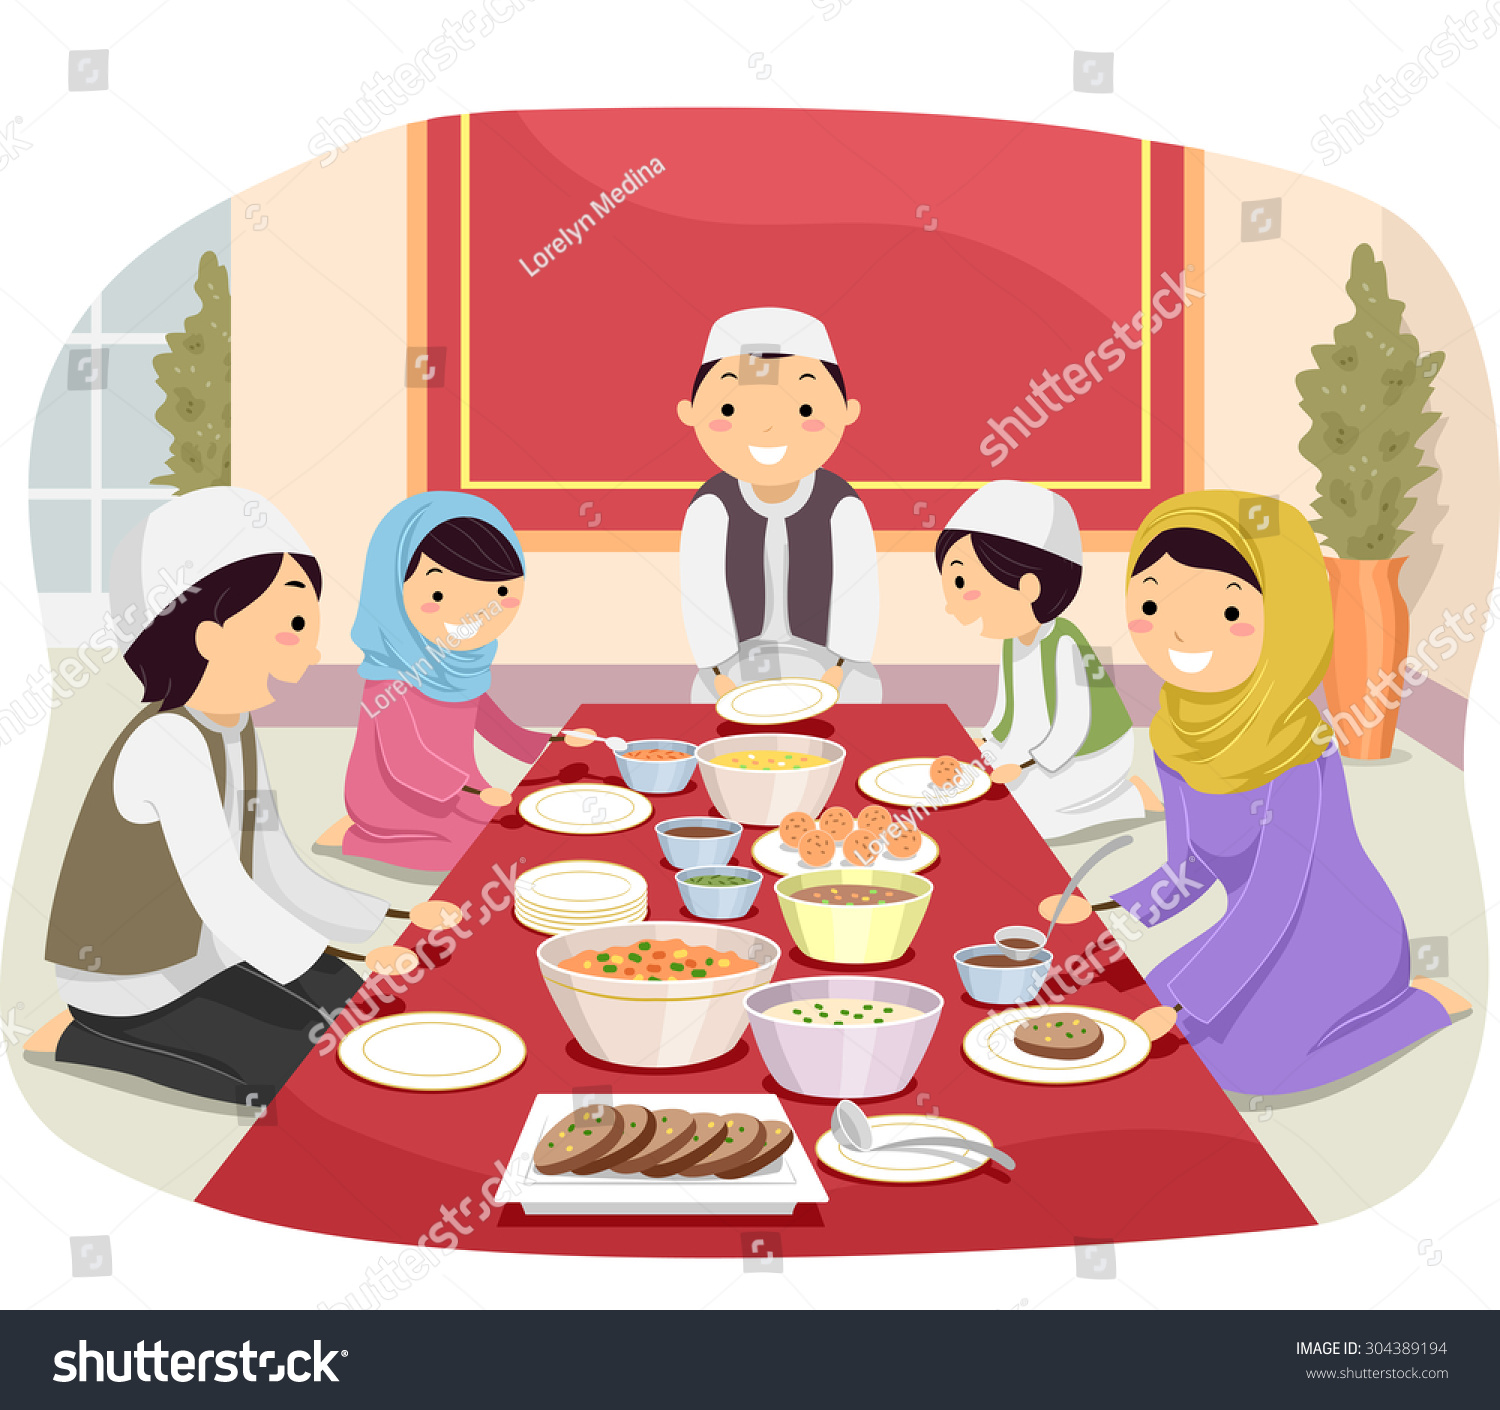 clipart family eating - photo #21